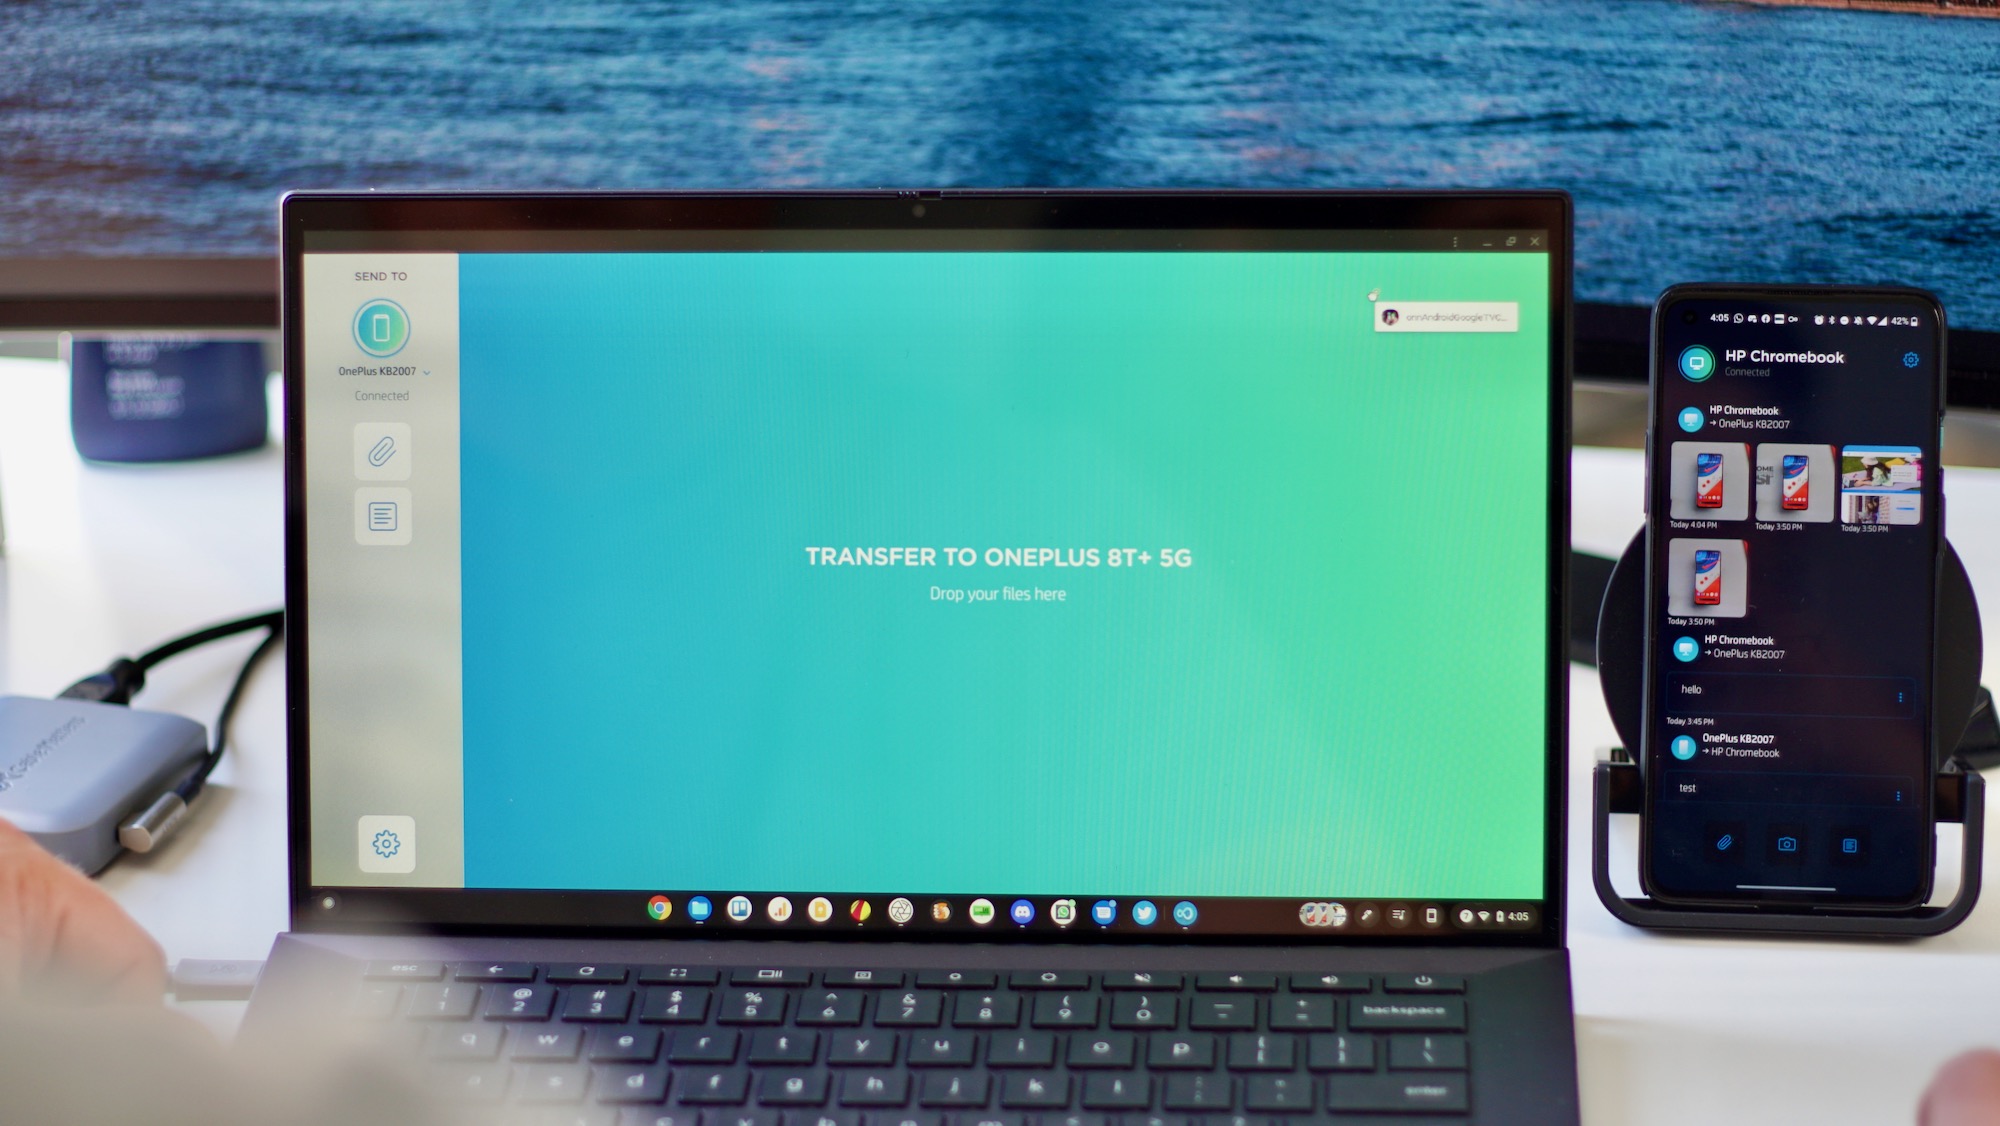 First Look at Quick Drop: HP’s AirDrop Clone for Chromebooks [VIDEO]